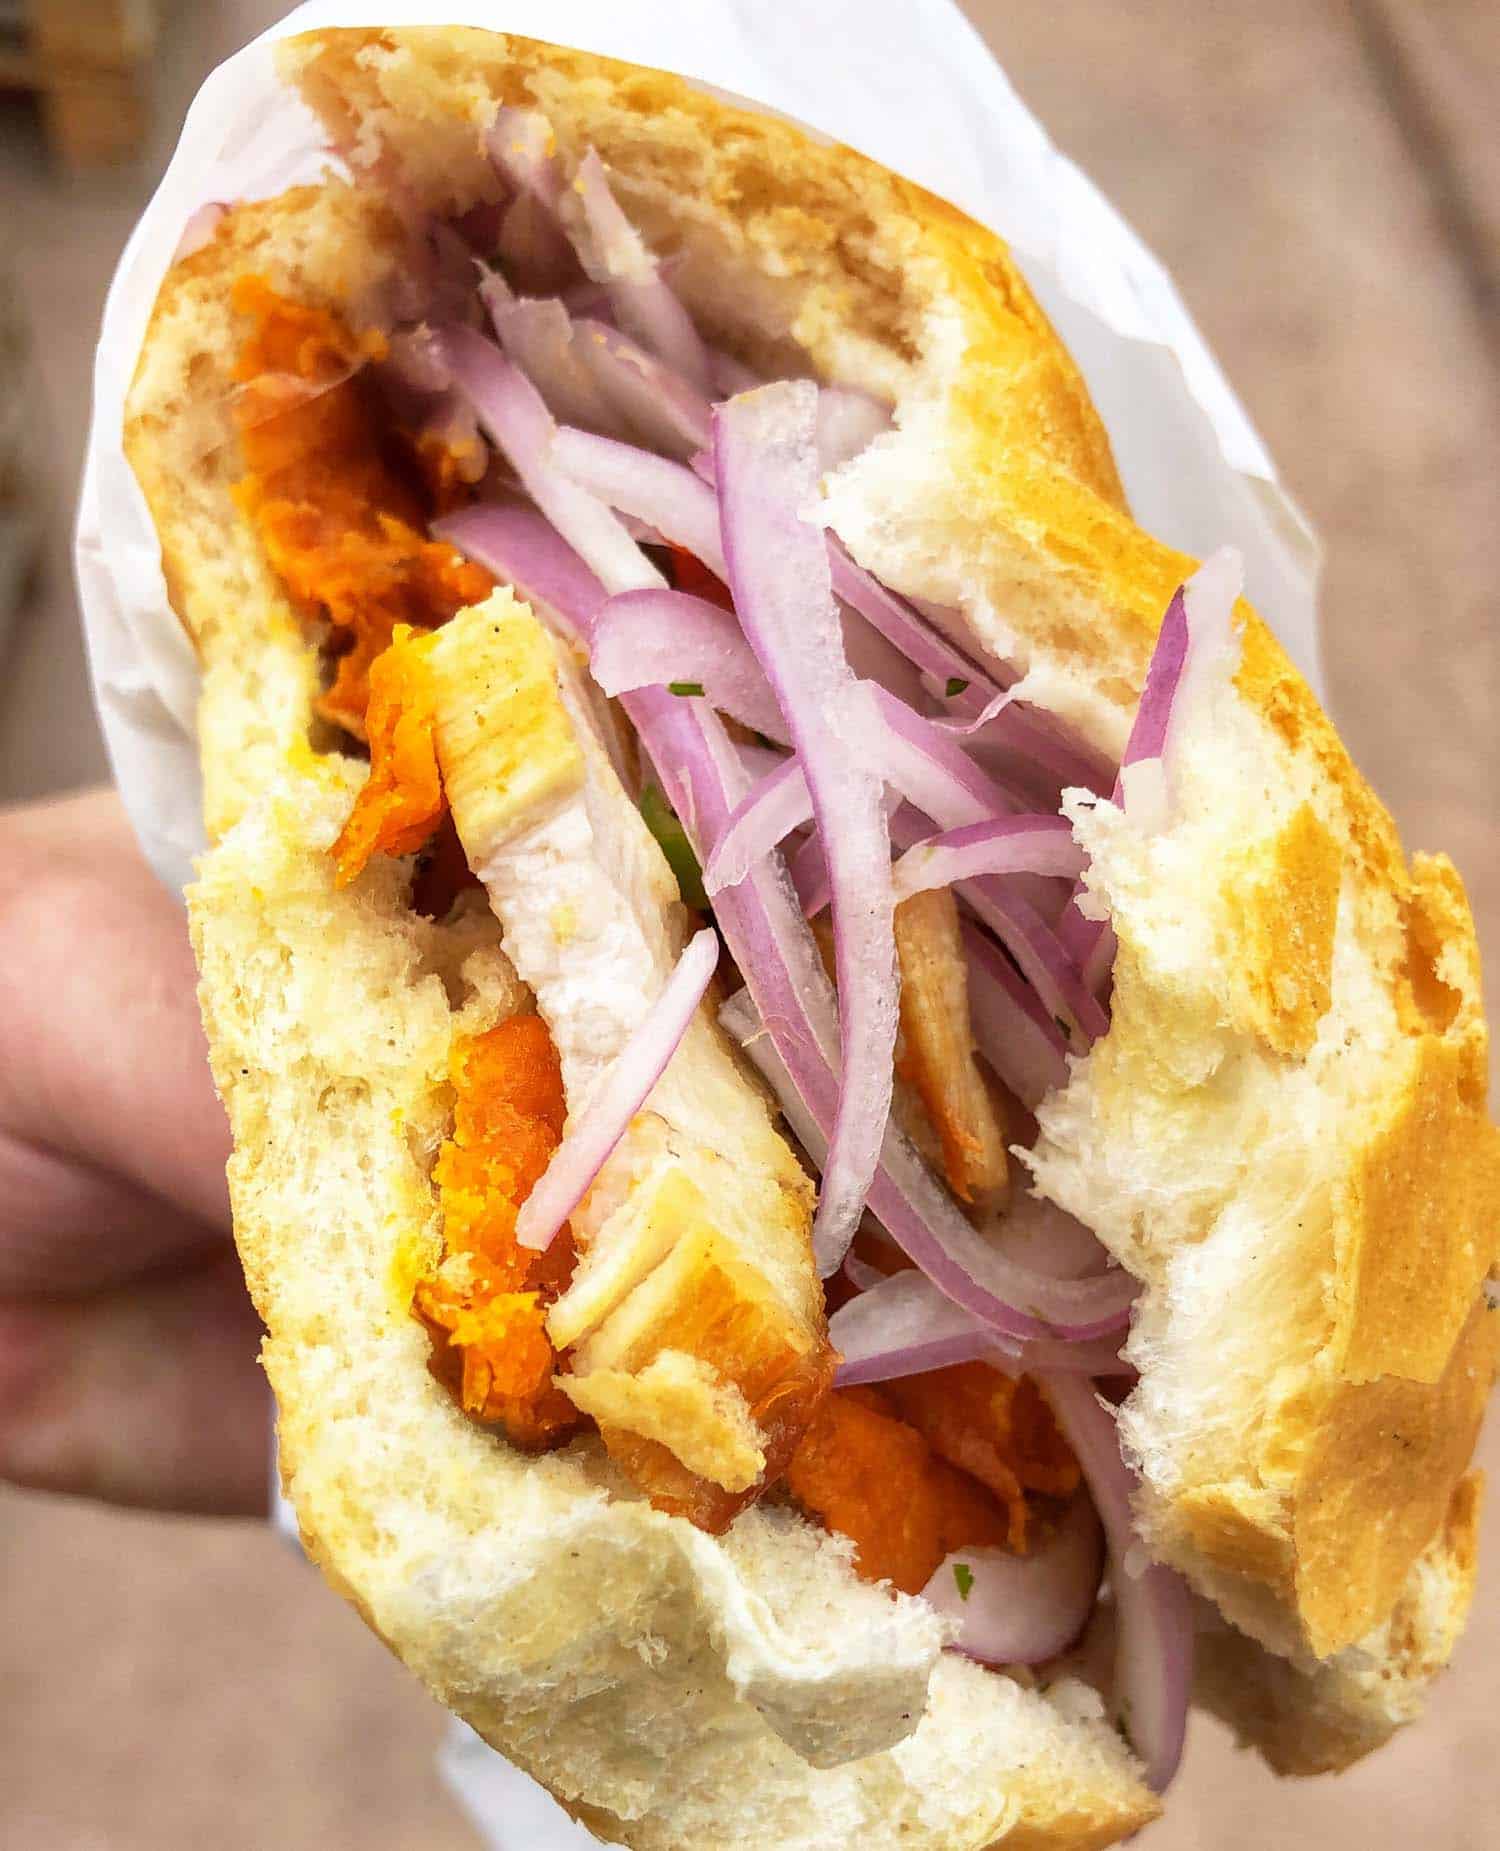 Pan con chicharron in Peru is one of the most iconic, best sandwiches in the world.